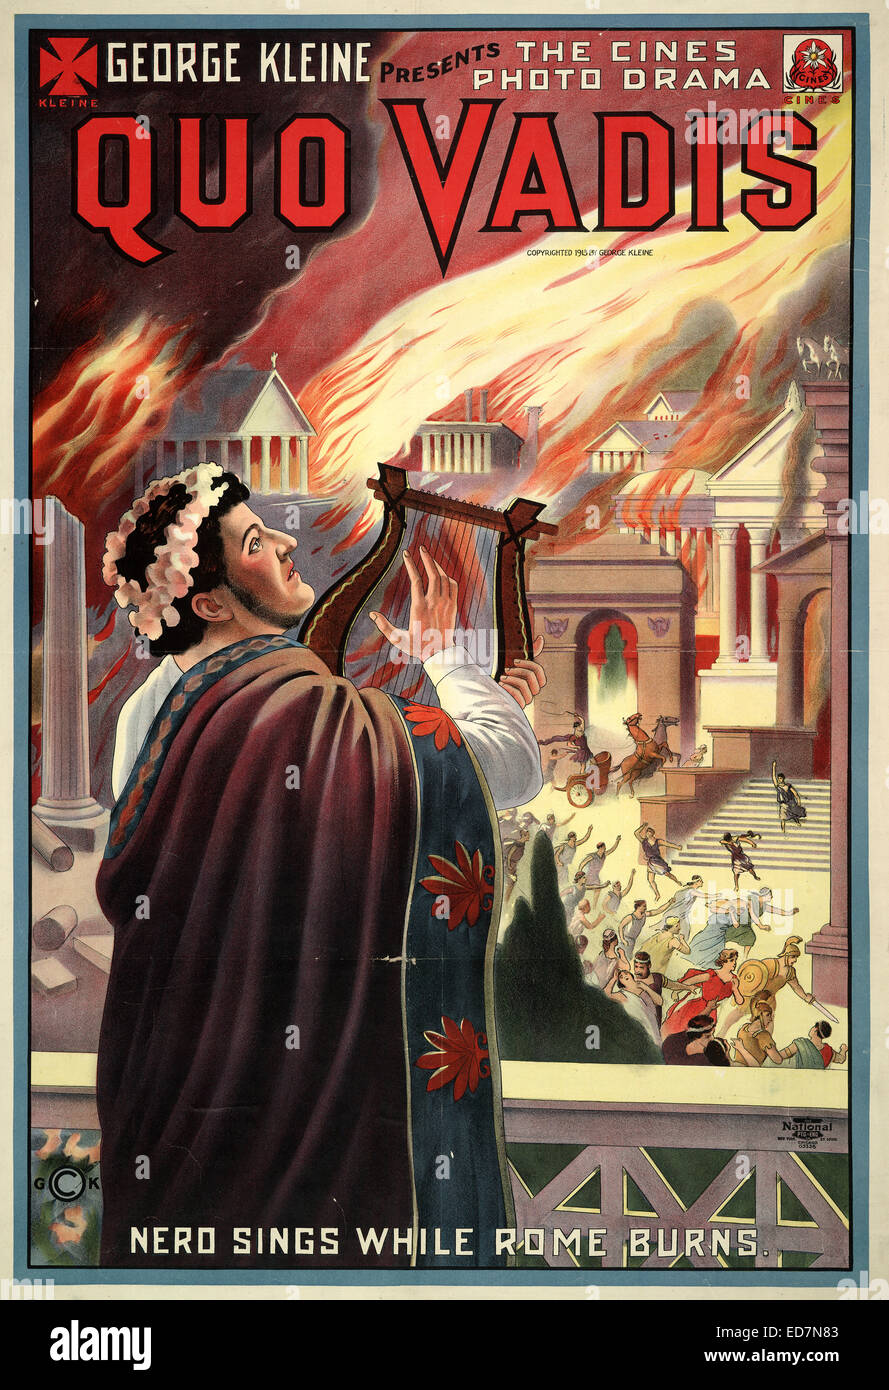 Motion picture poster for 'Quo Vadis' showing Nero playing lyre while citizens of Rome flee the fire. 1913.  George Kleine Stock Photo